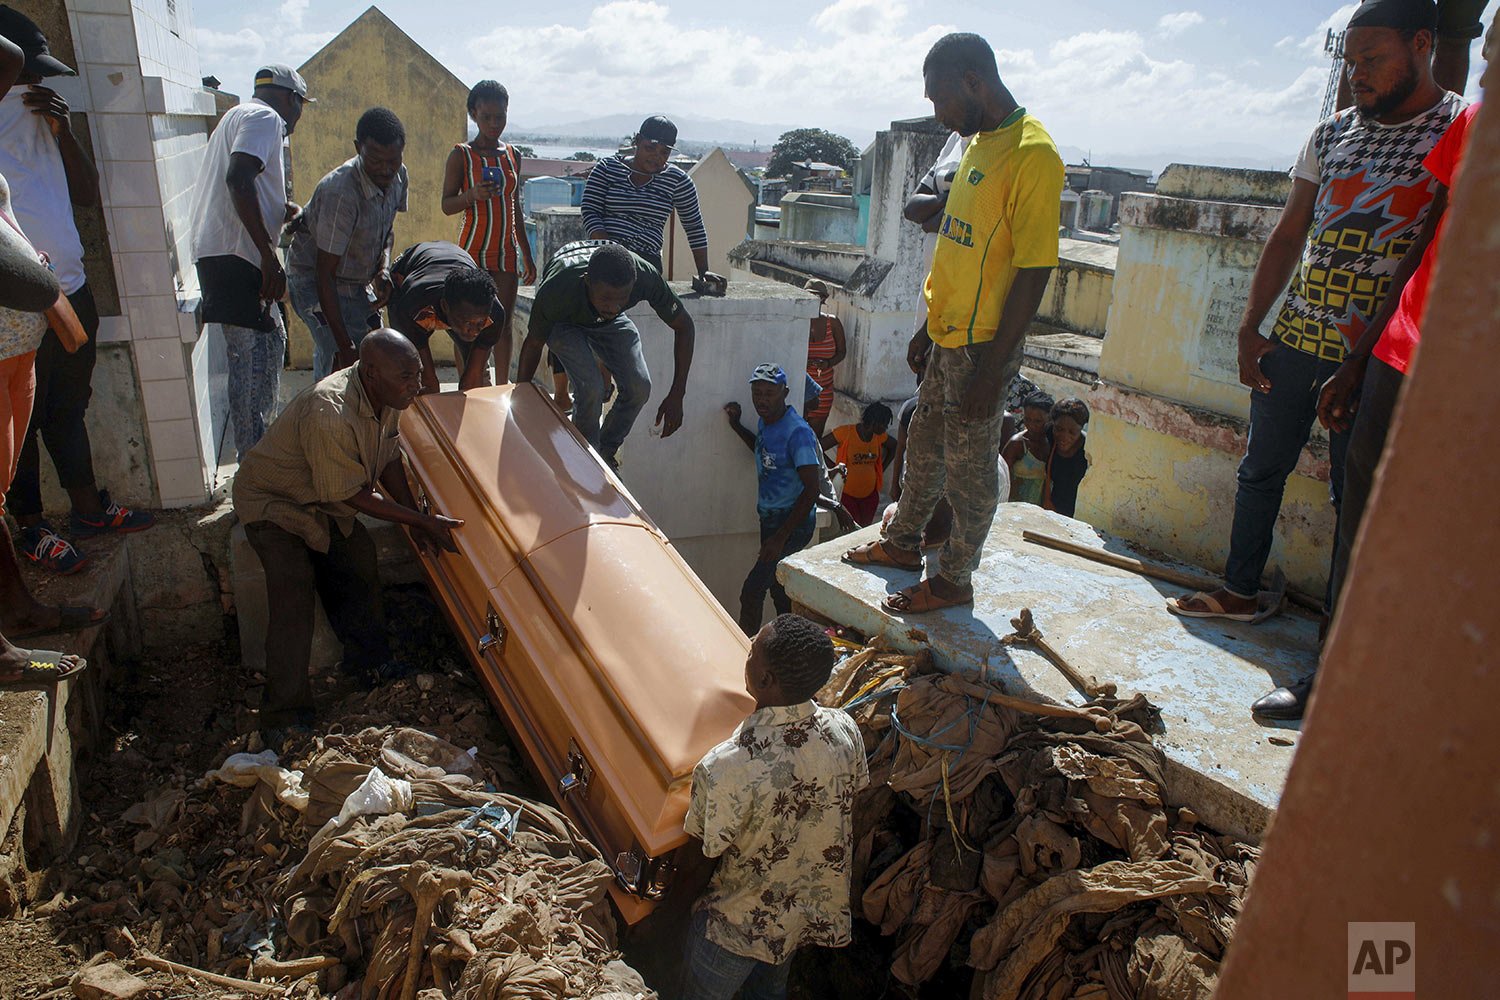  Relatives bury a woman who died in the hospital from her burn injuries caused by a gasoline truck that overturned and exploded, killing dozens in Cap-Haitien Haiti, Dec. 15, 2021. (AP Photo/Odelyn Joseph) 